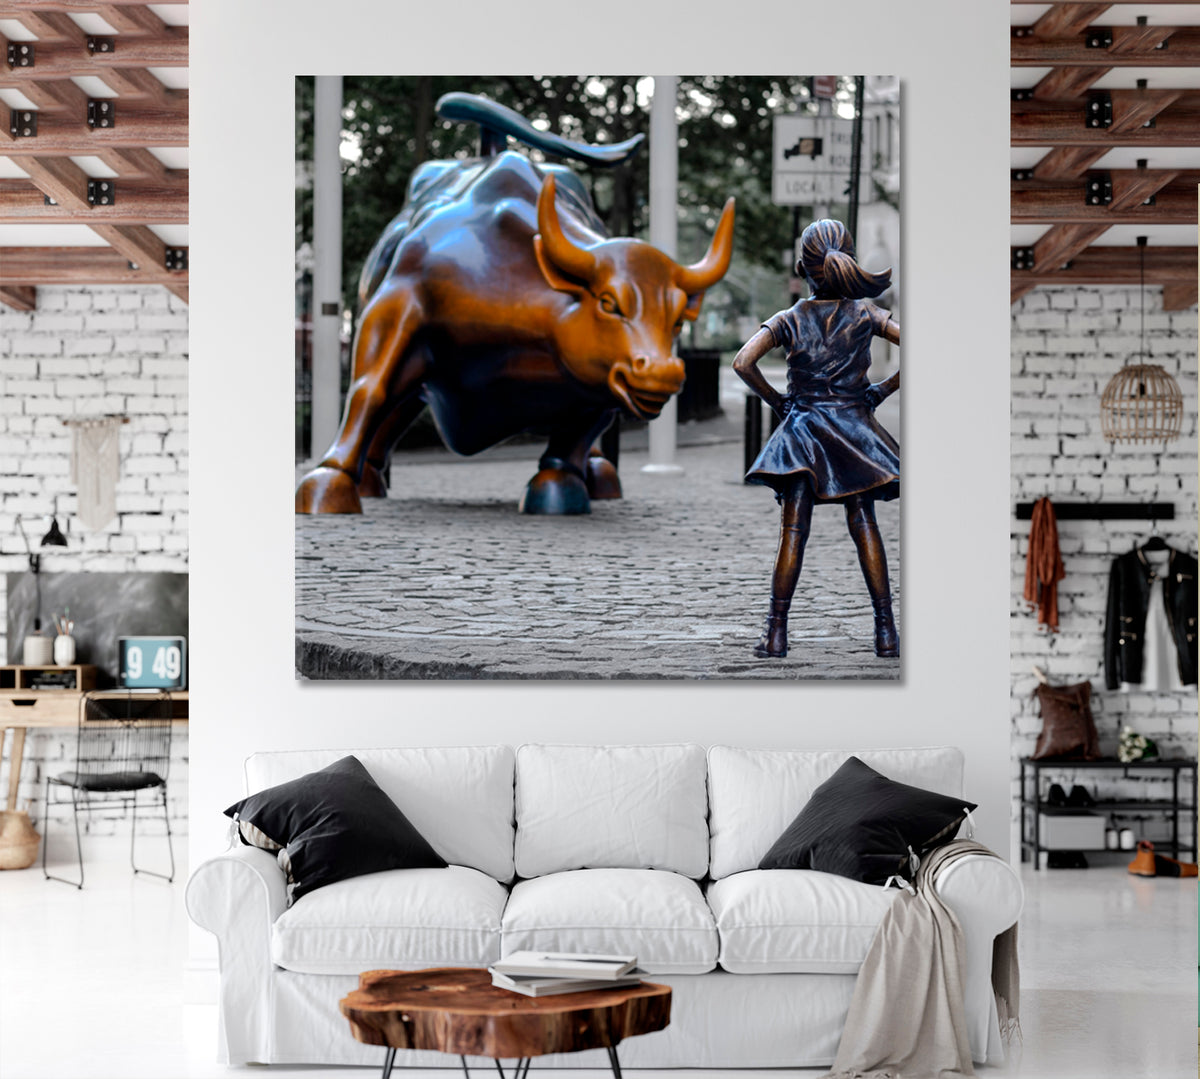 The Fearless Girl and Charging Bull New York City Manhattan NY USA - Square Panel Famous Landmarks Artwork Print Artesty 1 Panel 12"x12" 